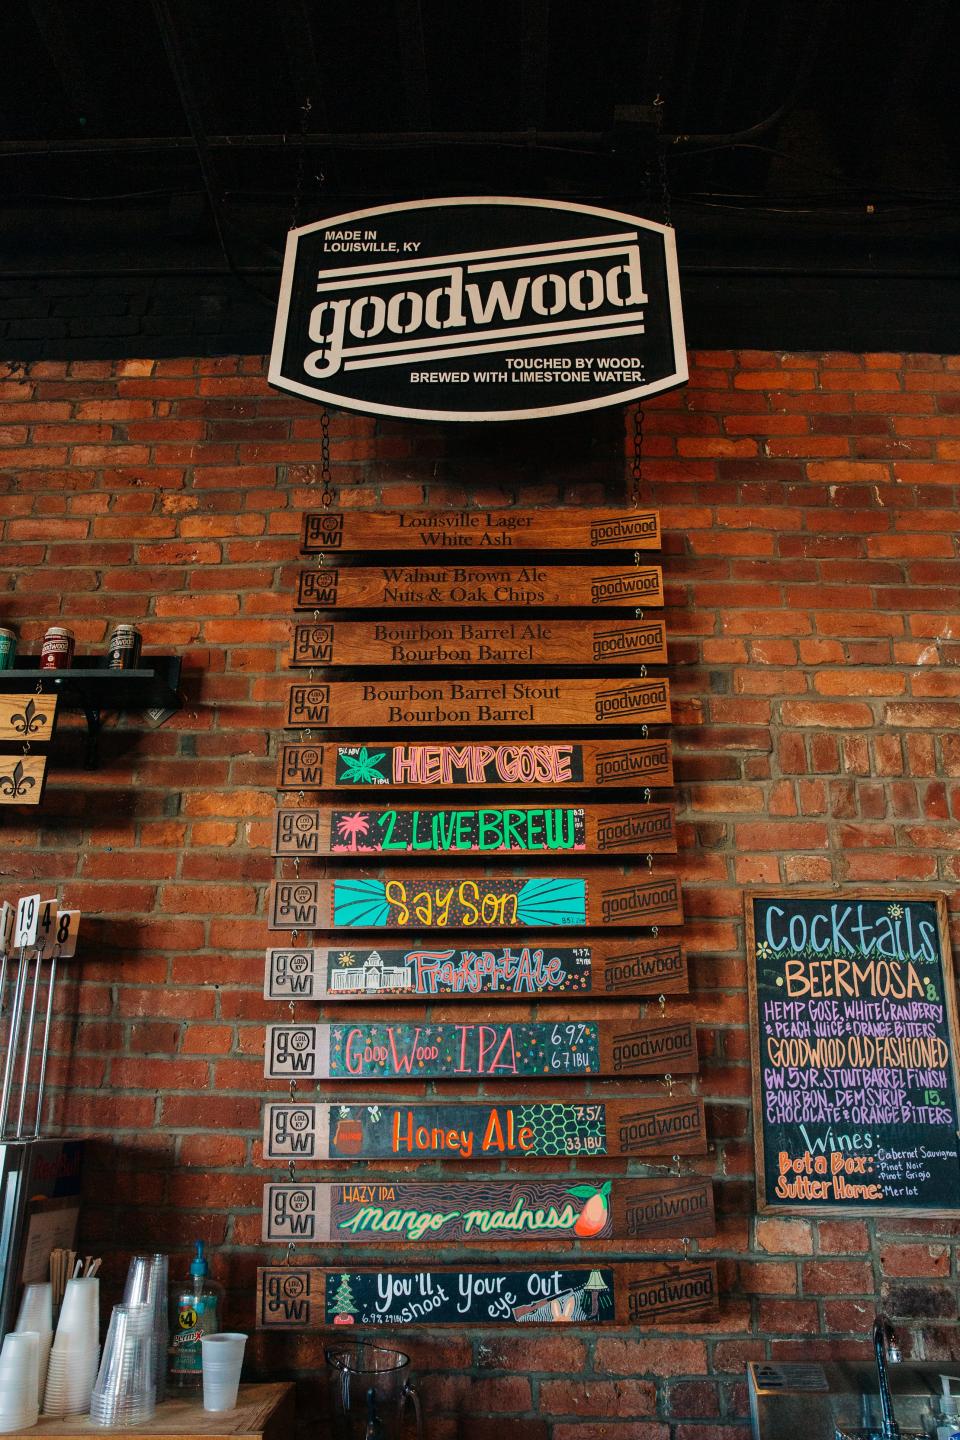 Goodwood Brewing & Spirits offers a long lineup of beers, in addition to its signature bourbon-barrel-aged beers.